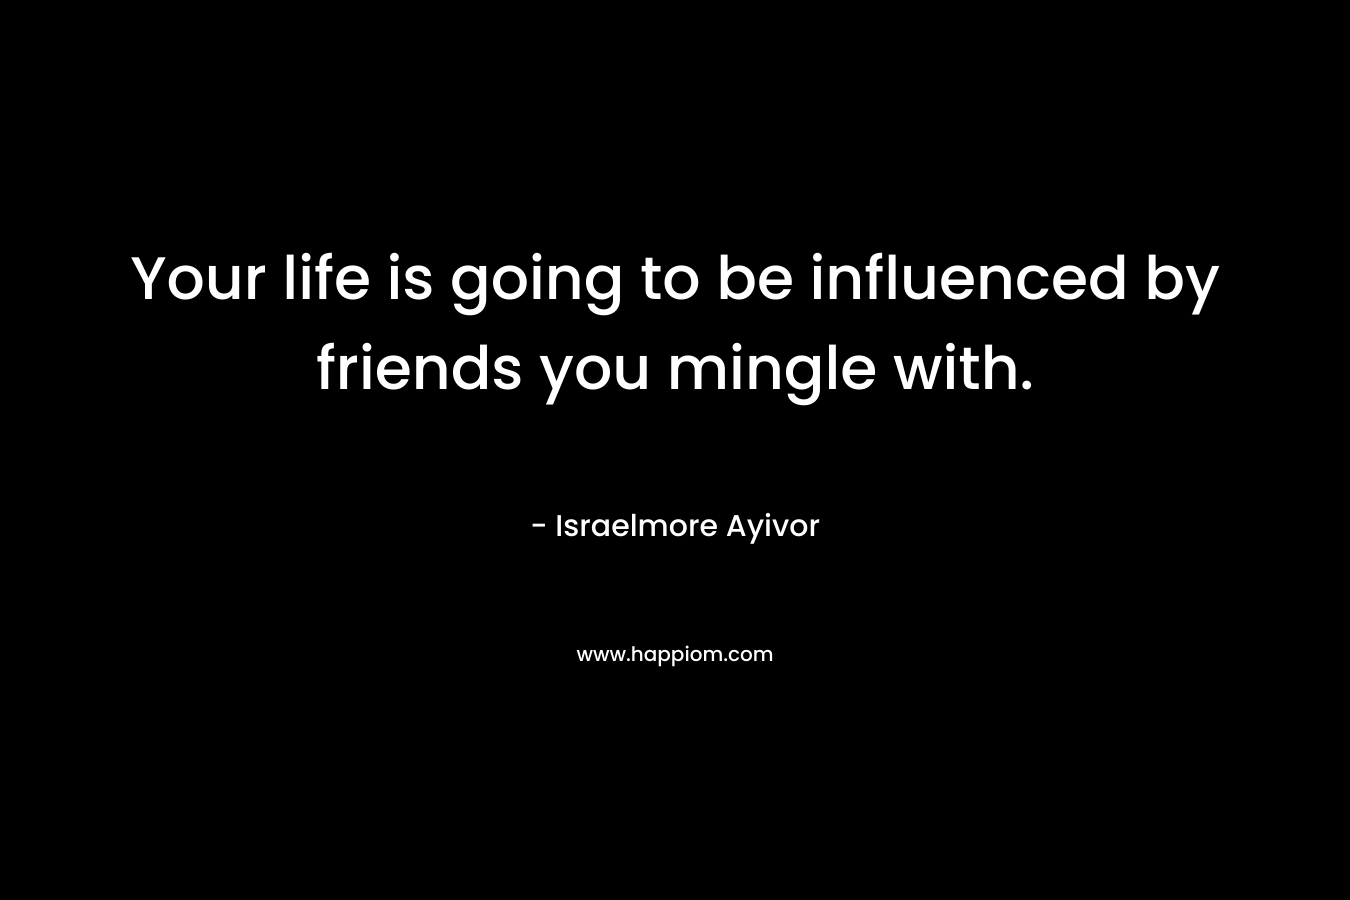 Your life is going to be influenced by friends you mingle with. – Israelmore Ayivor